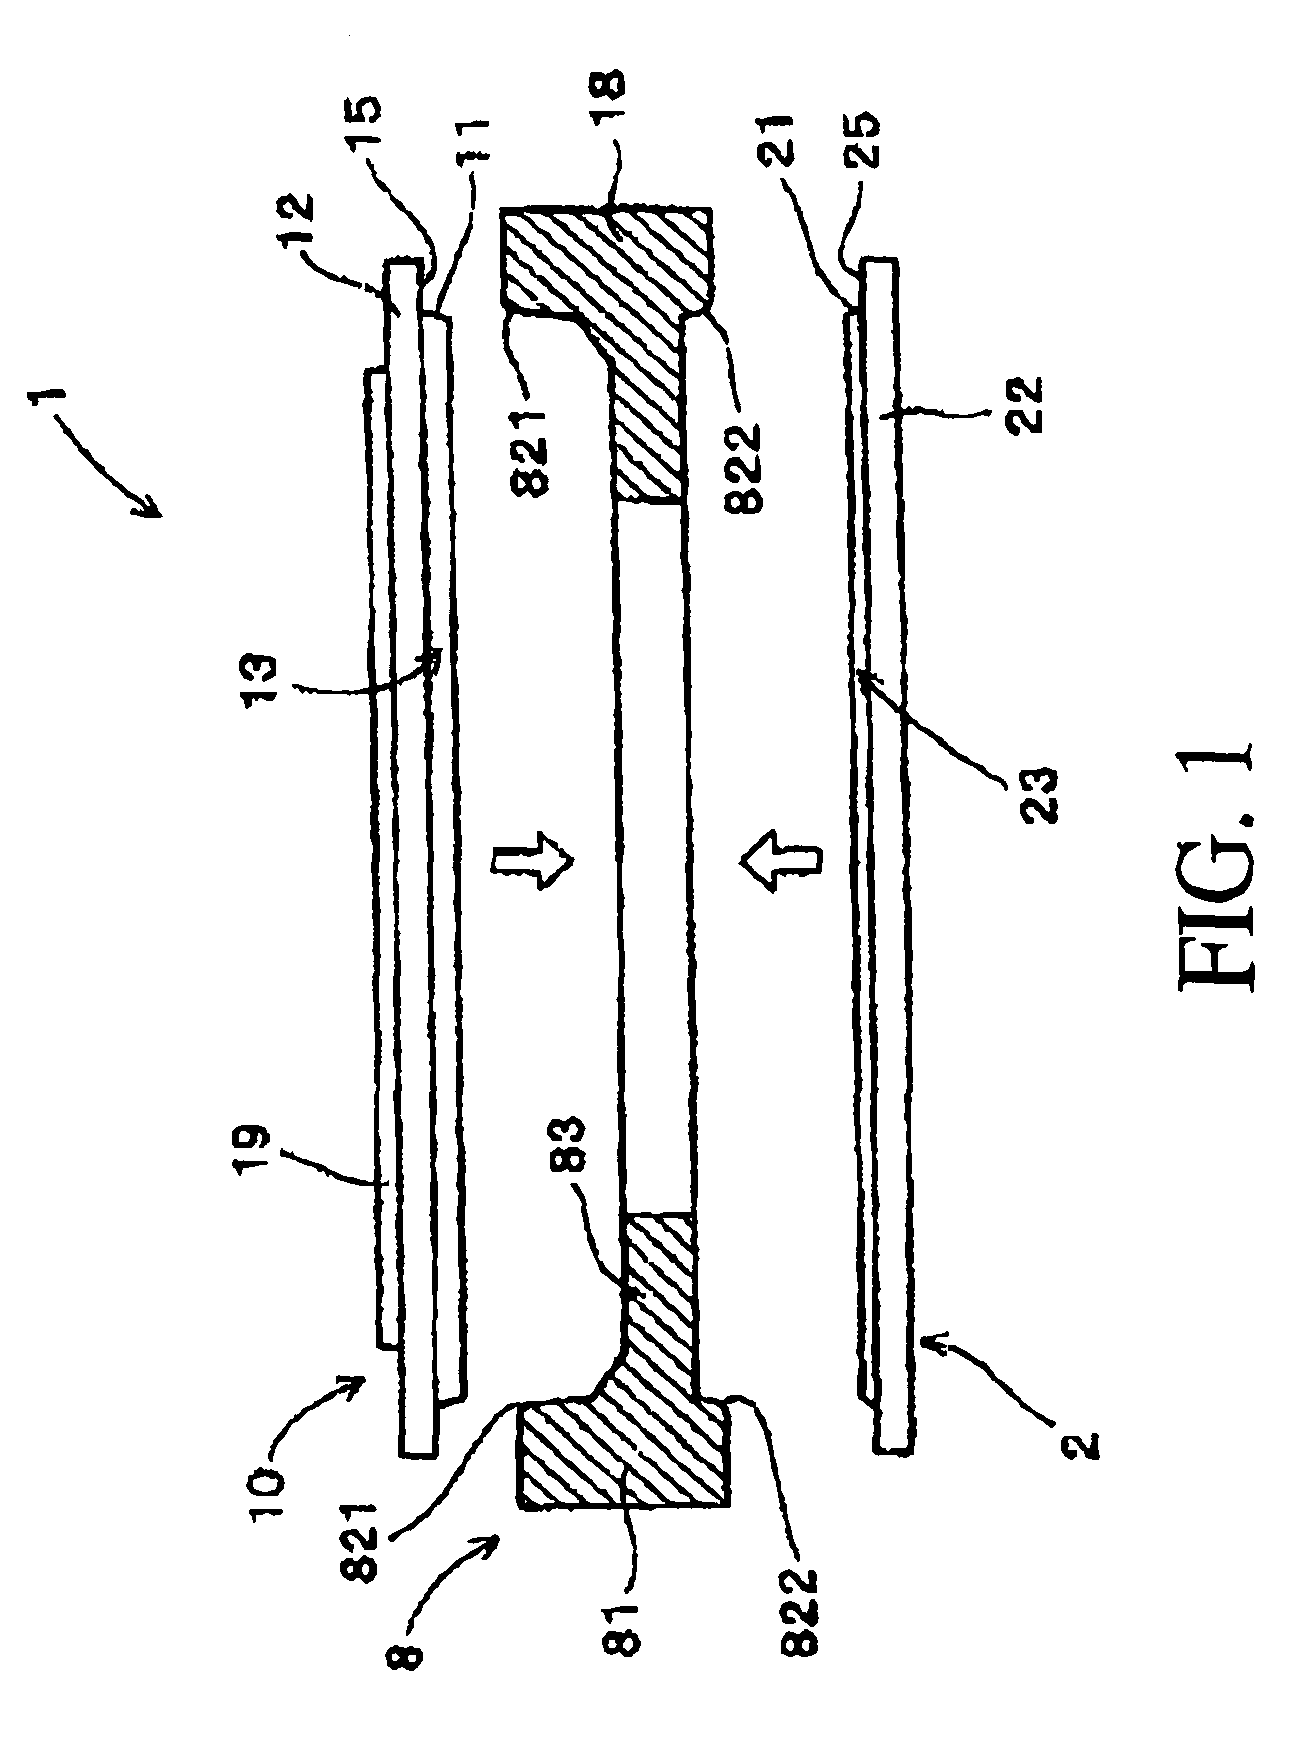 Induction hardening method and jig used in induction hardening process